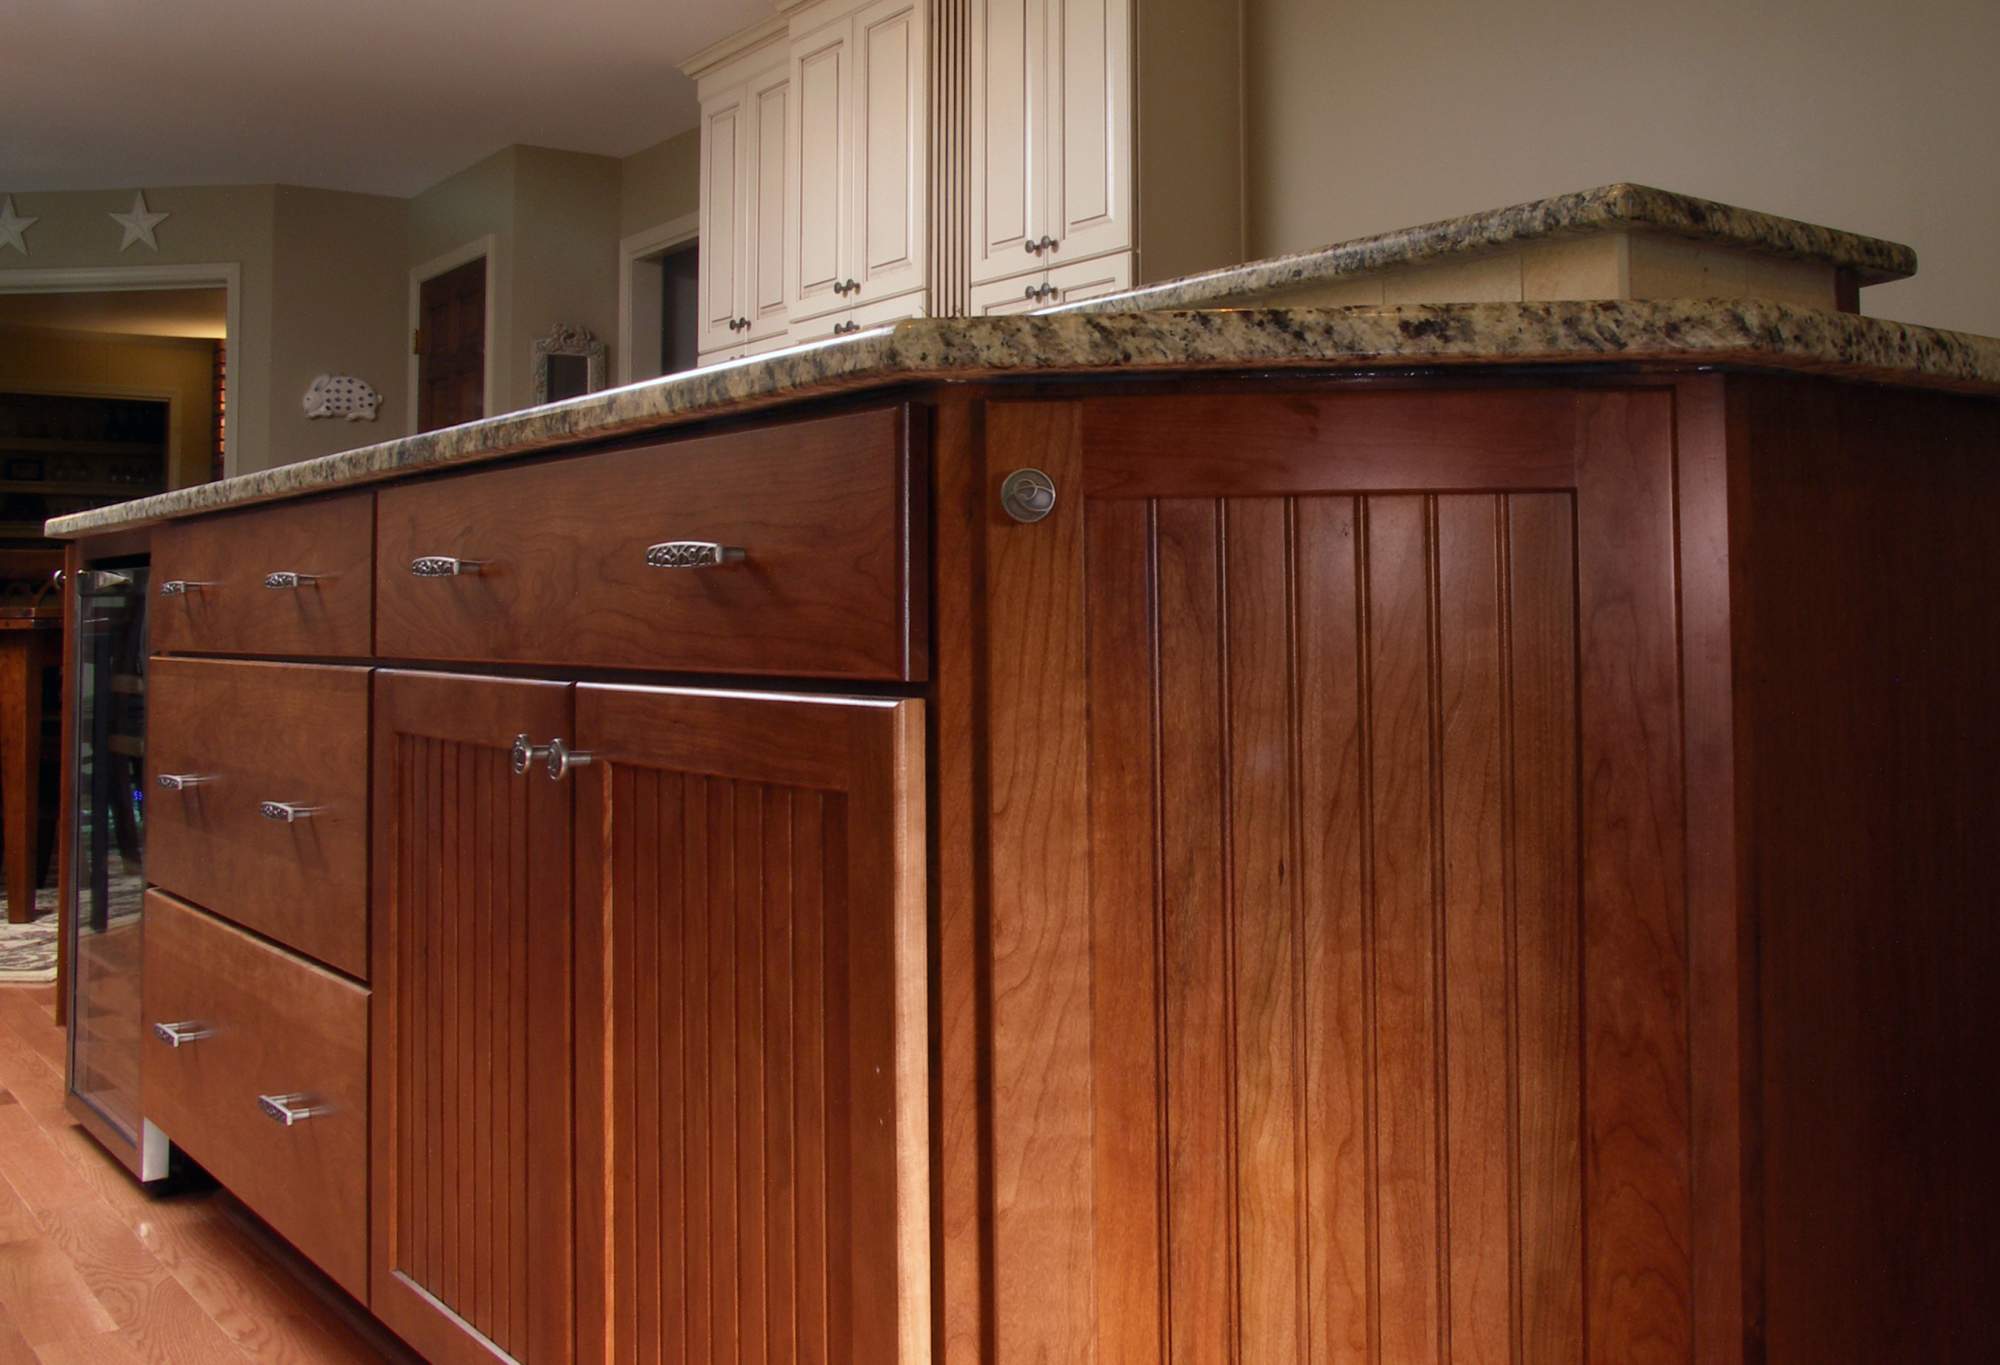 Traditional Kitchen Expansion With Large Island > Kitchens > Projects